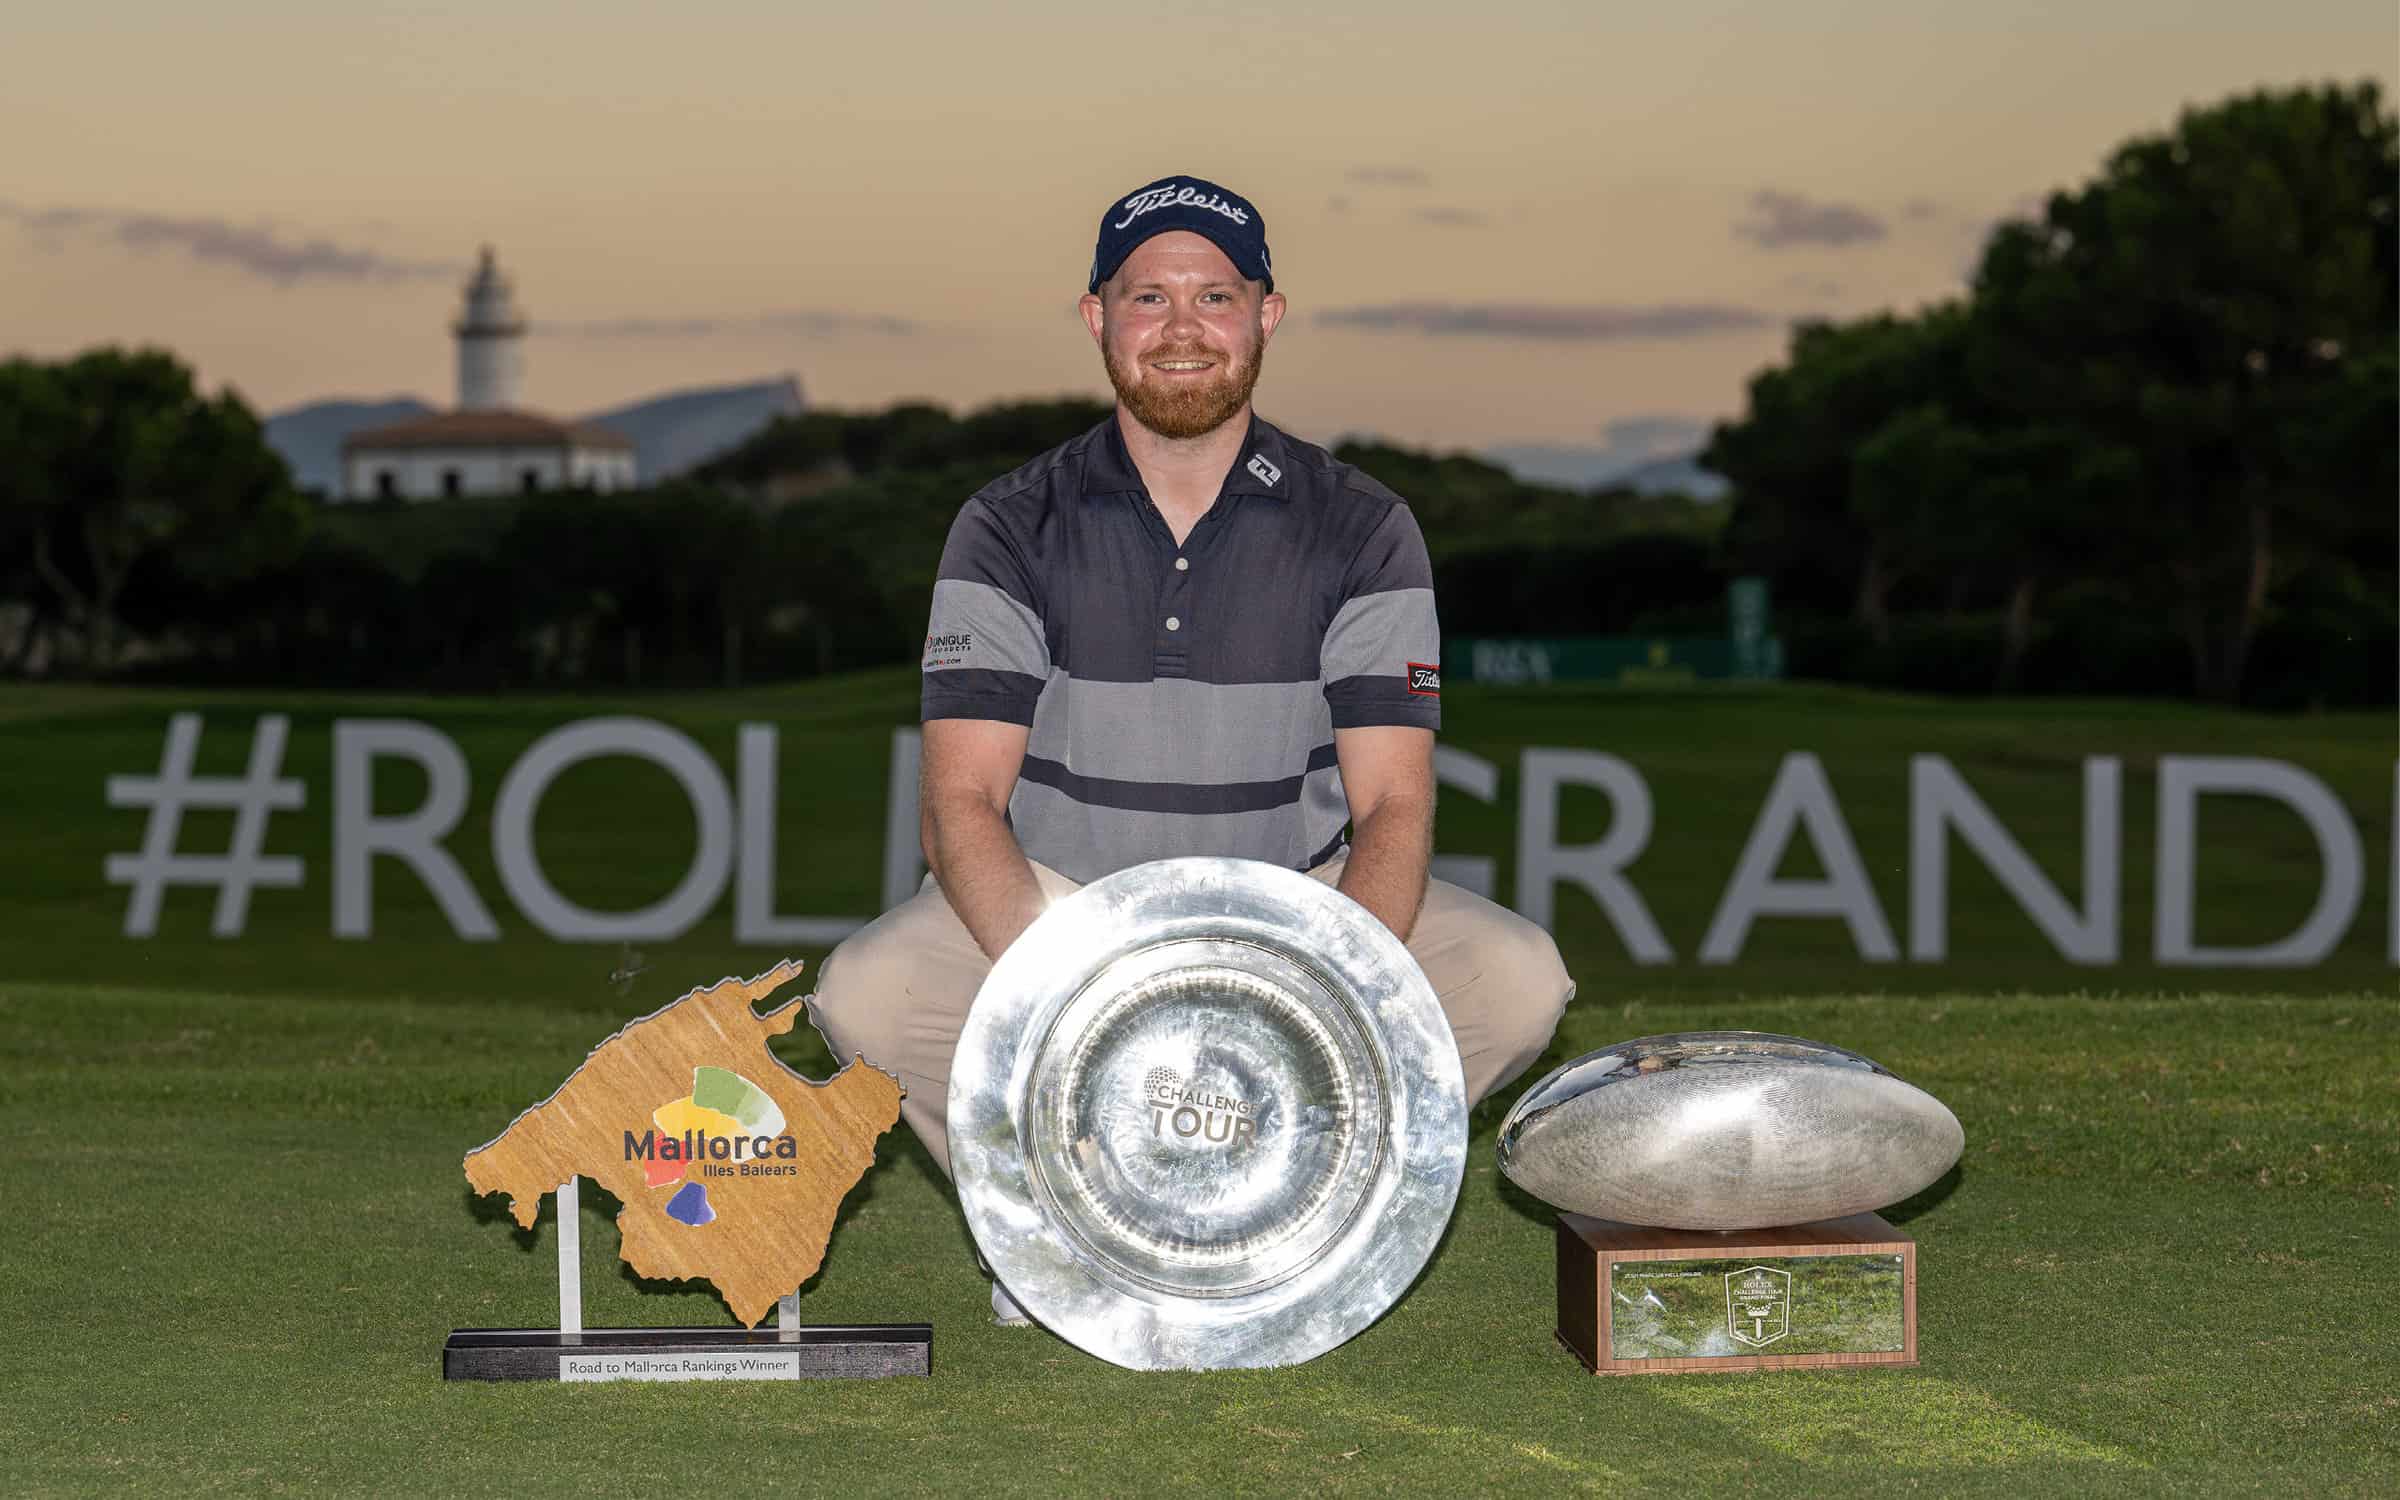 See which players have earned their 2023 DP World Tour cards